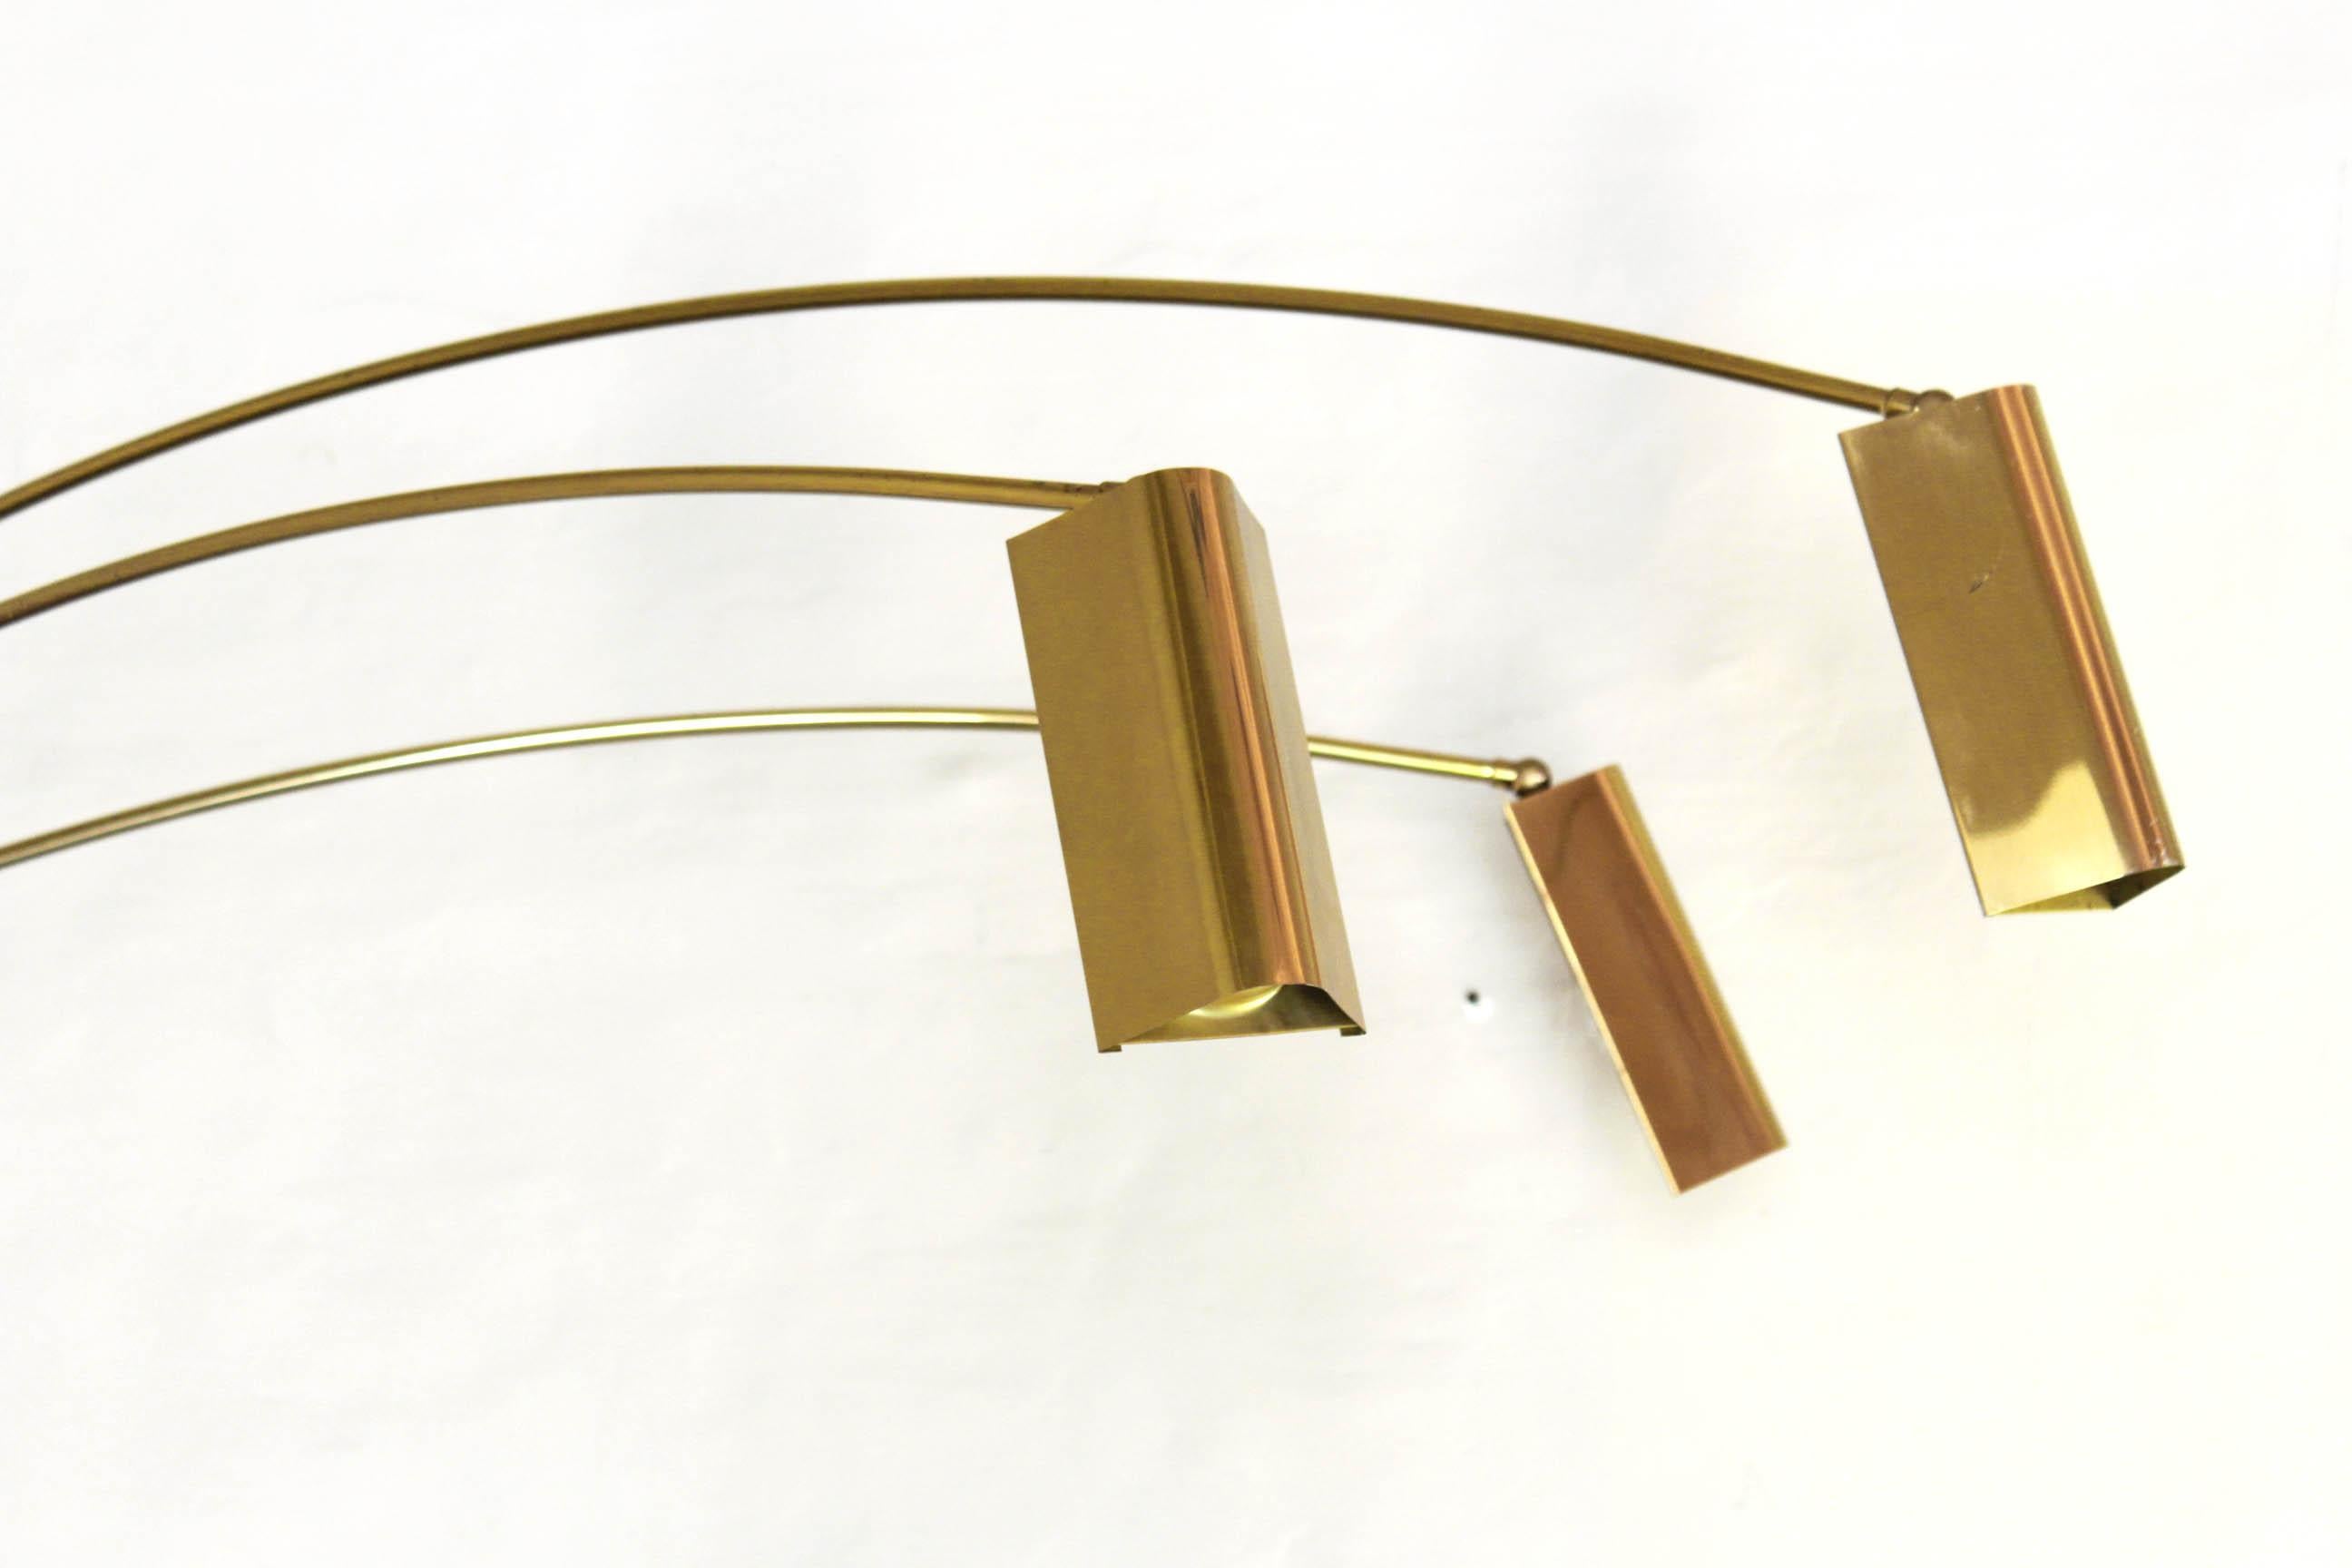 Vintage brass Floor Lamp, Italy 1970s
A late 1970s floor lamps with 3-light set on 3 different moving arms. The item is in excellent conditions with only few signs of time on the brass.